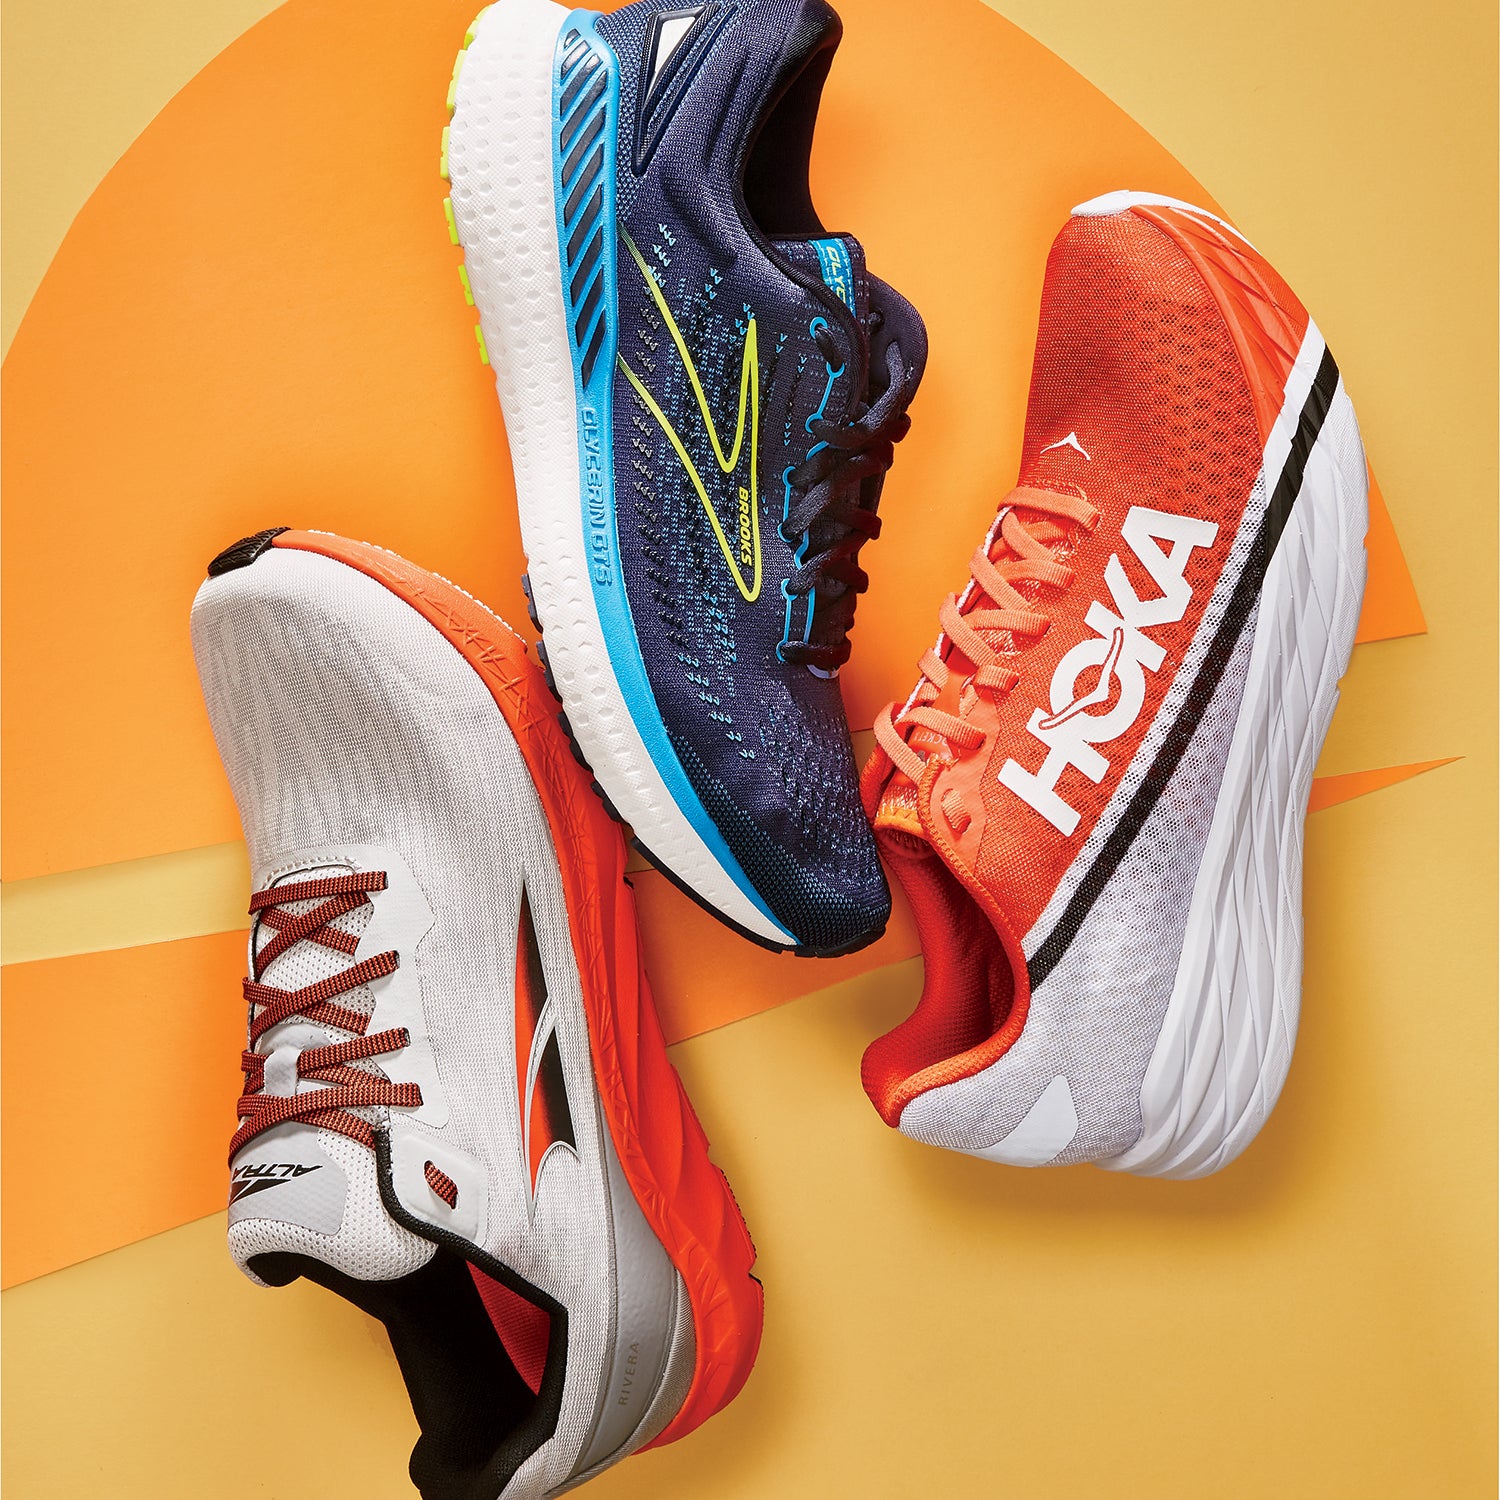 New Road Shoes for Every Kind of Runner